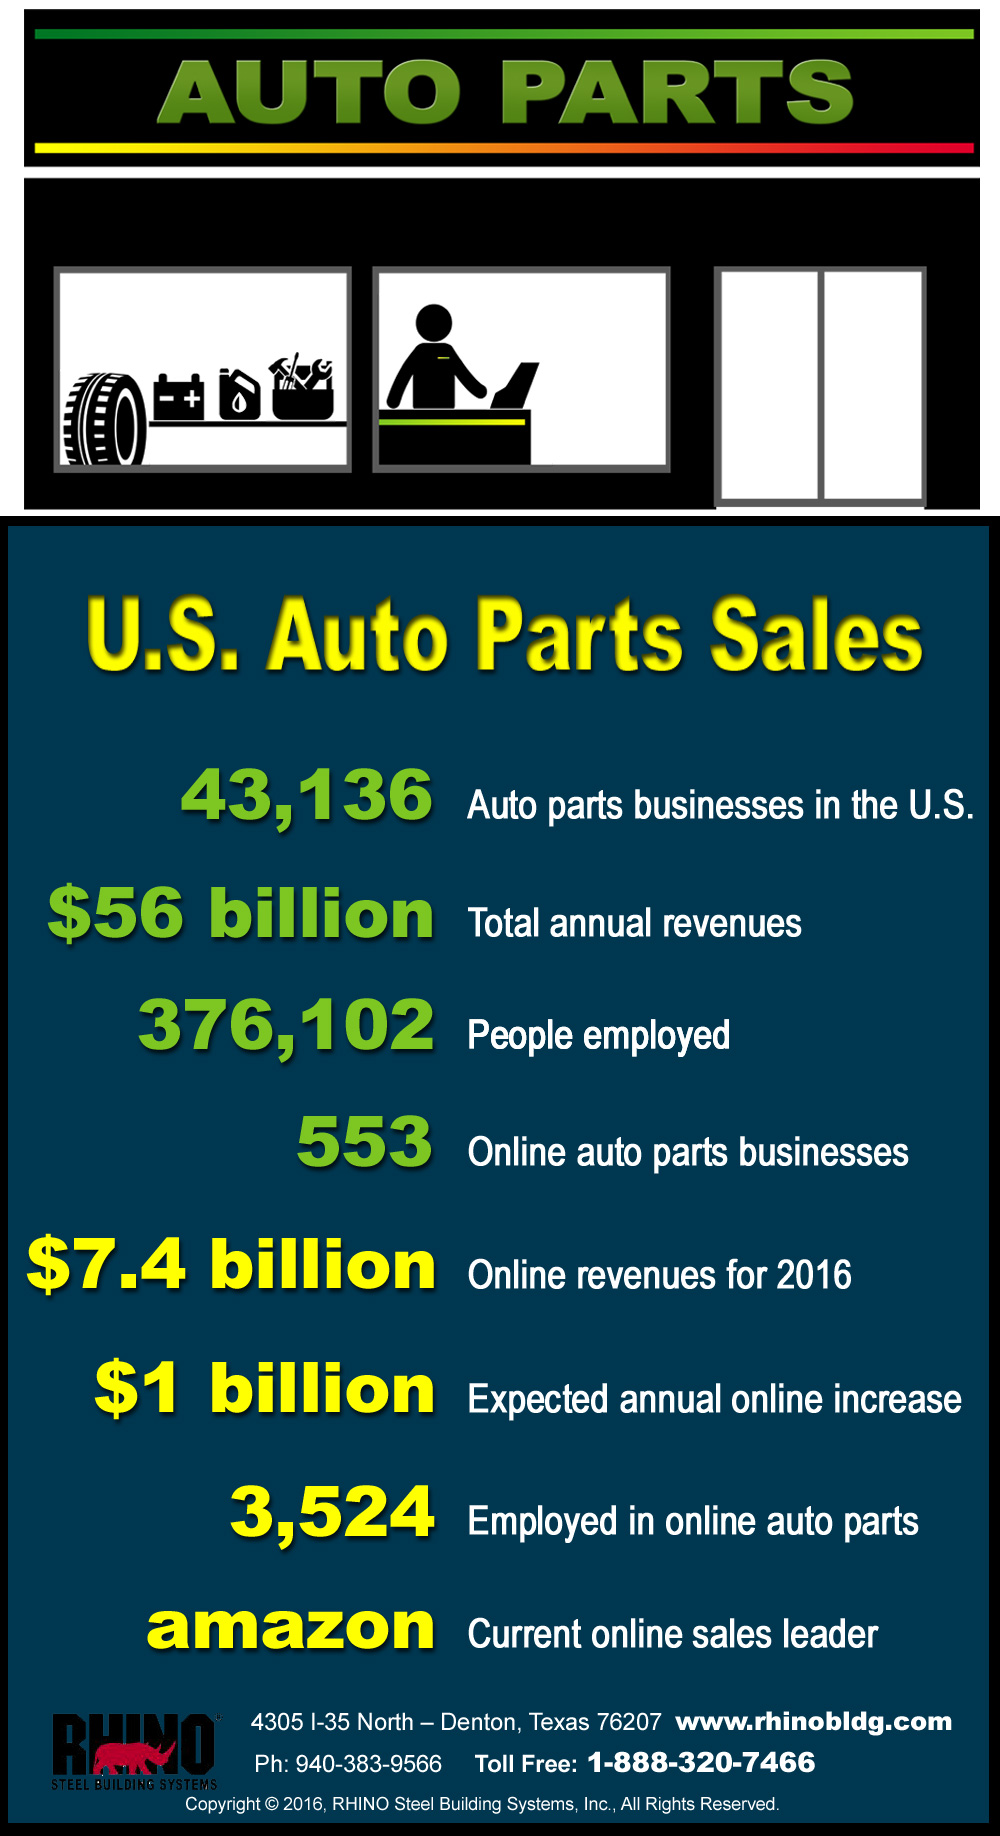 RHINO Steel Buildings Systems inforgraphic on Auto Parts Stores and Online Sales.